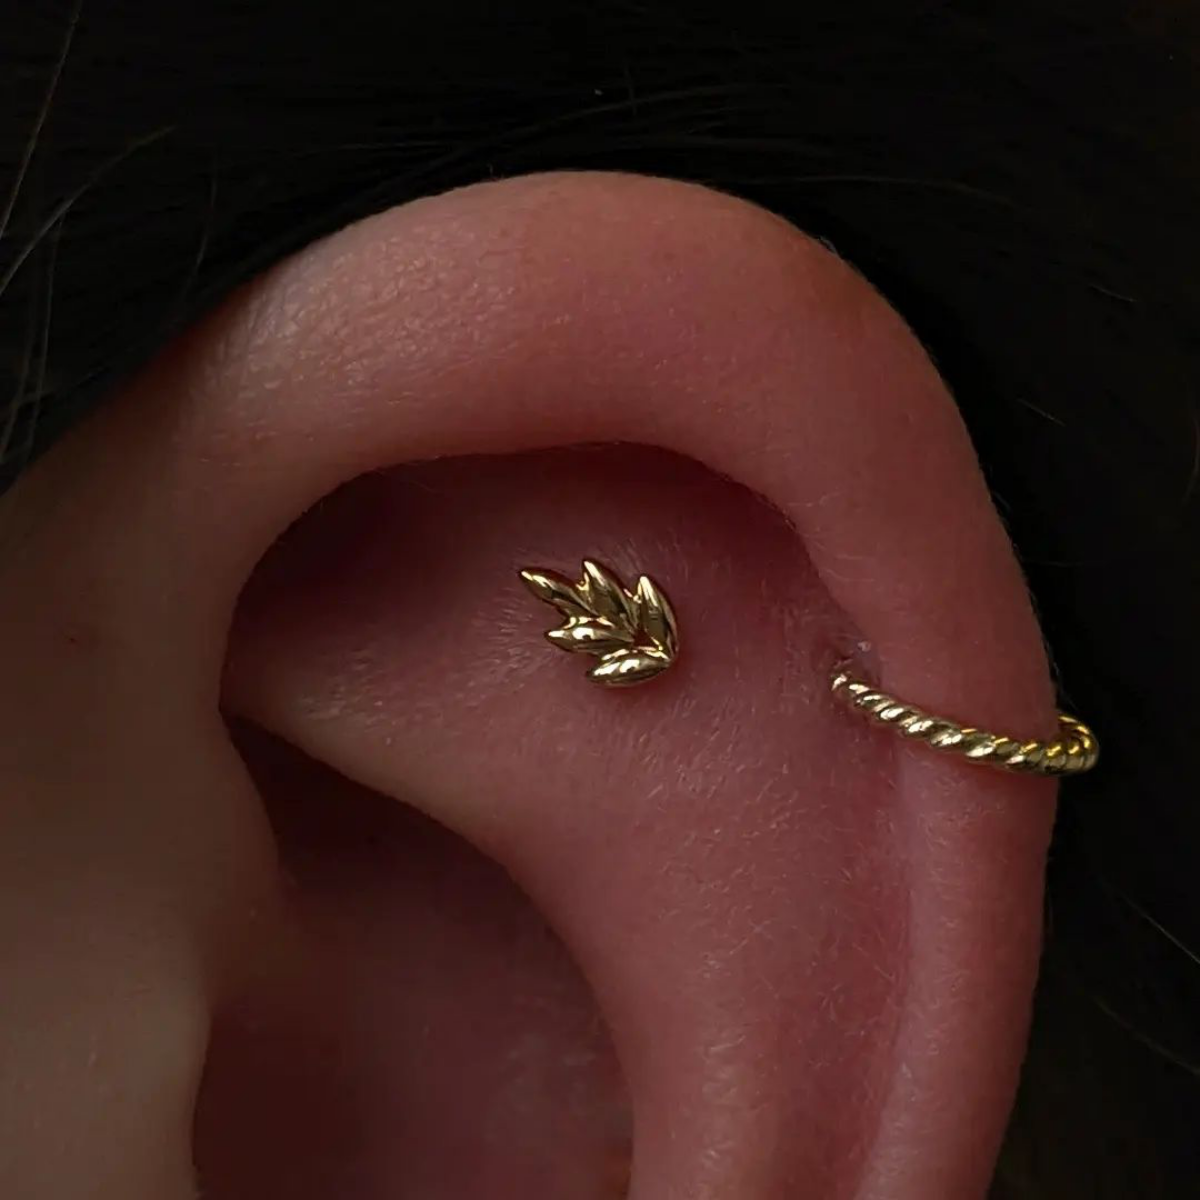 helix piercing gold leaf and earring